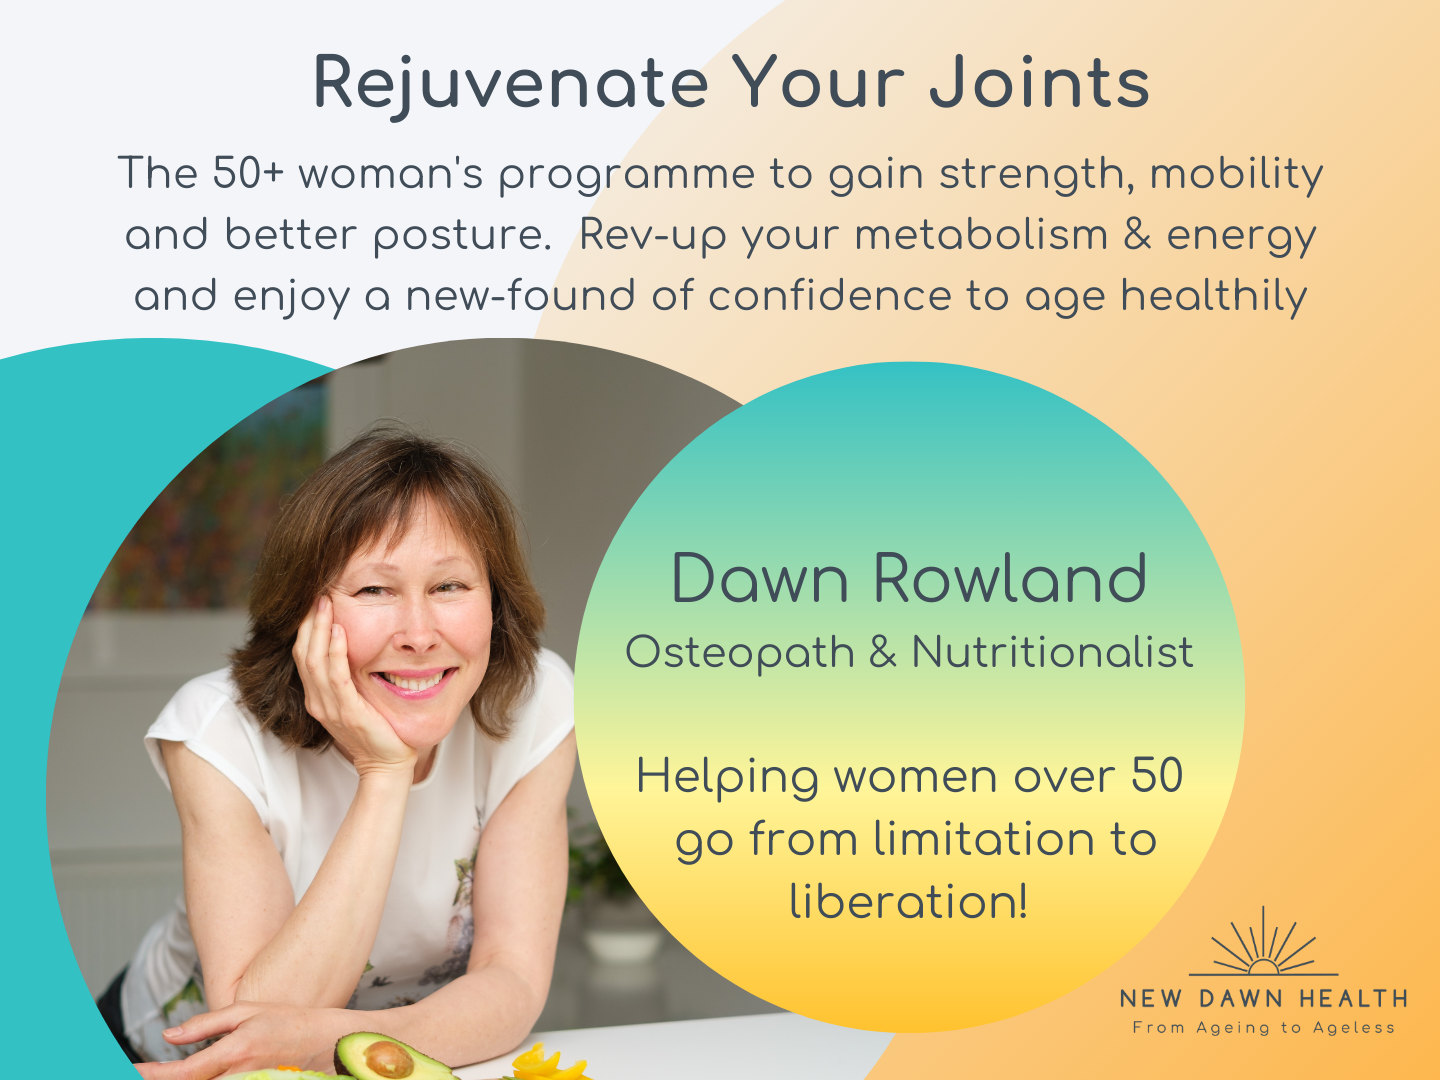 Menopause aches and pains - rejuvenate your joints